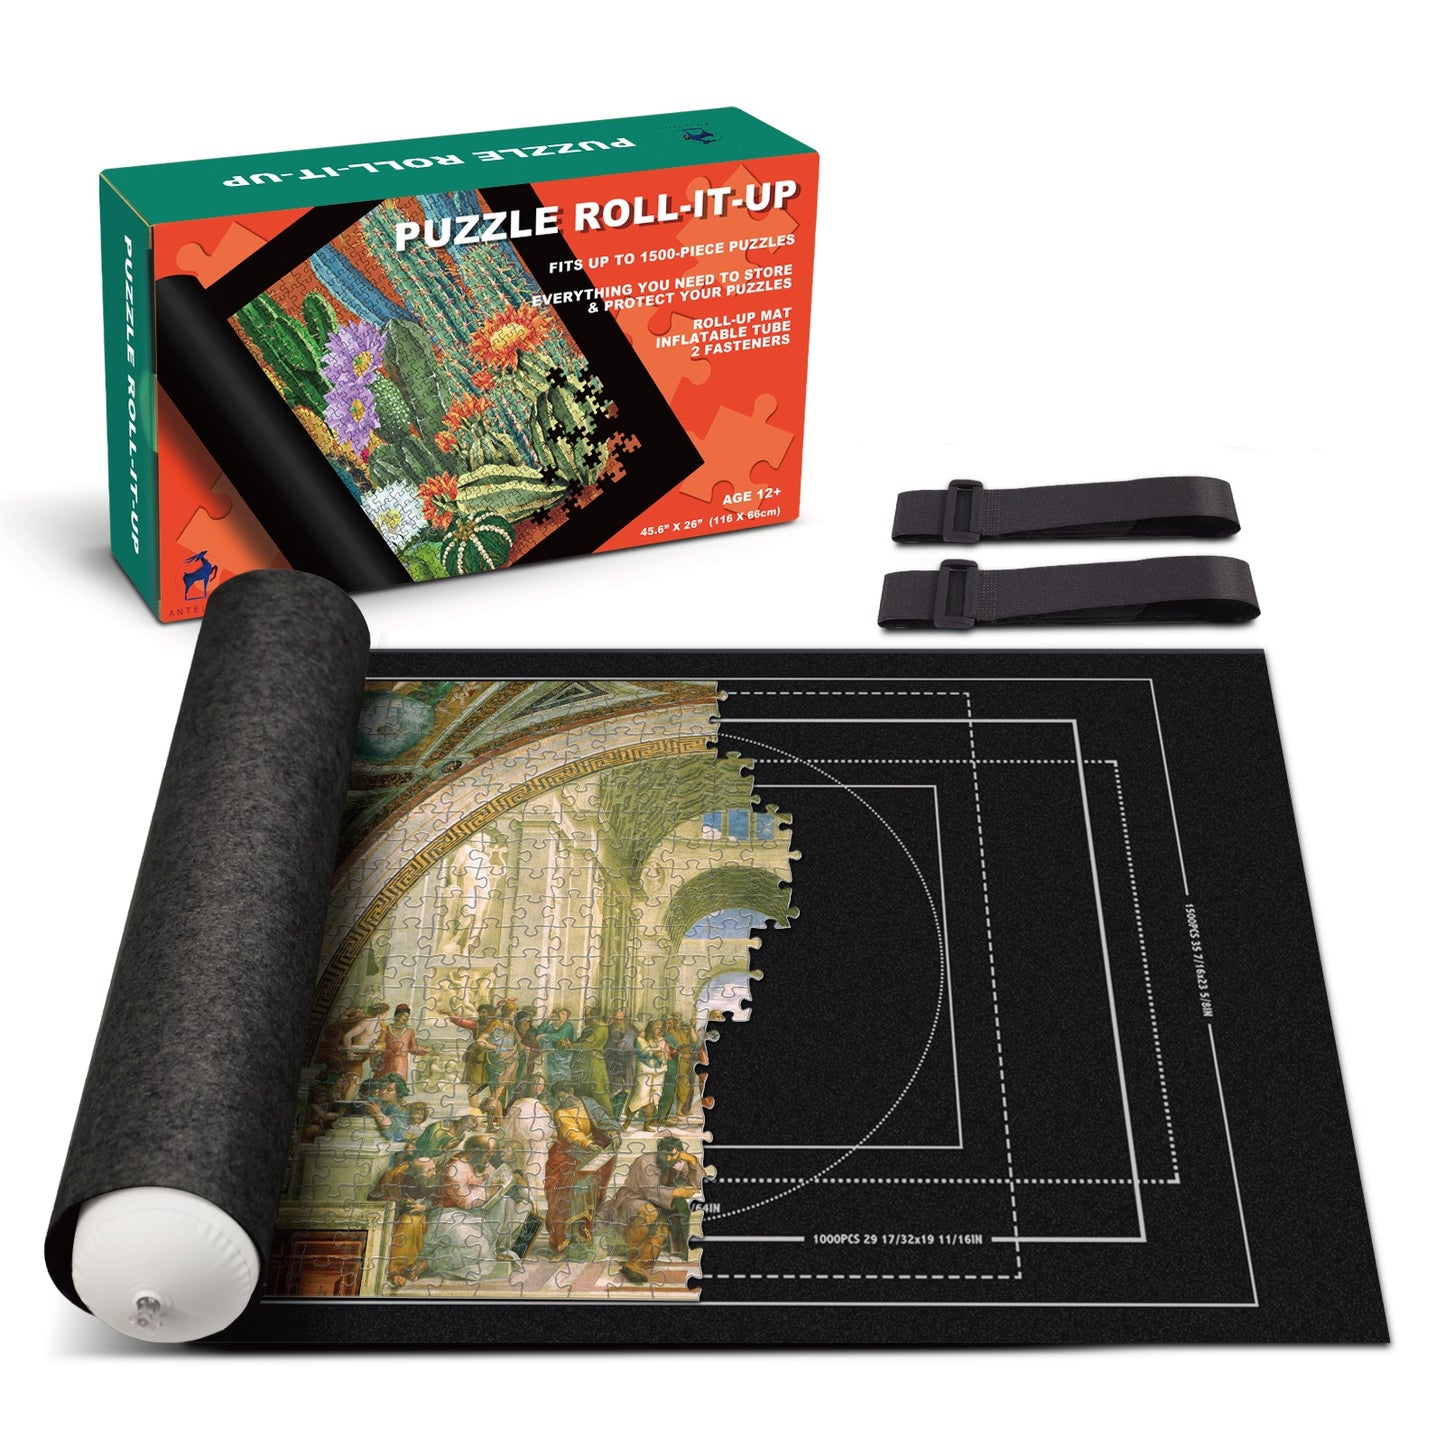 Puzzle Roll-It-Up Mat - Fits up to 1500-piece puzzles 3-piece set